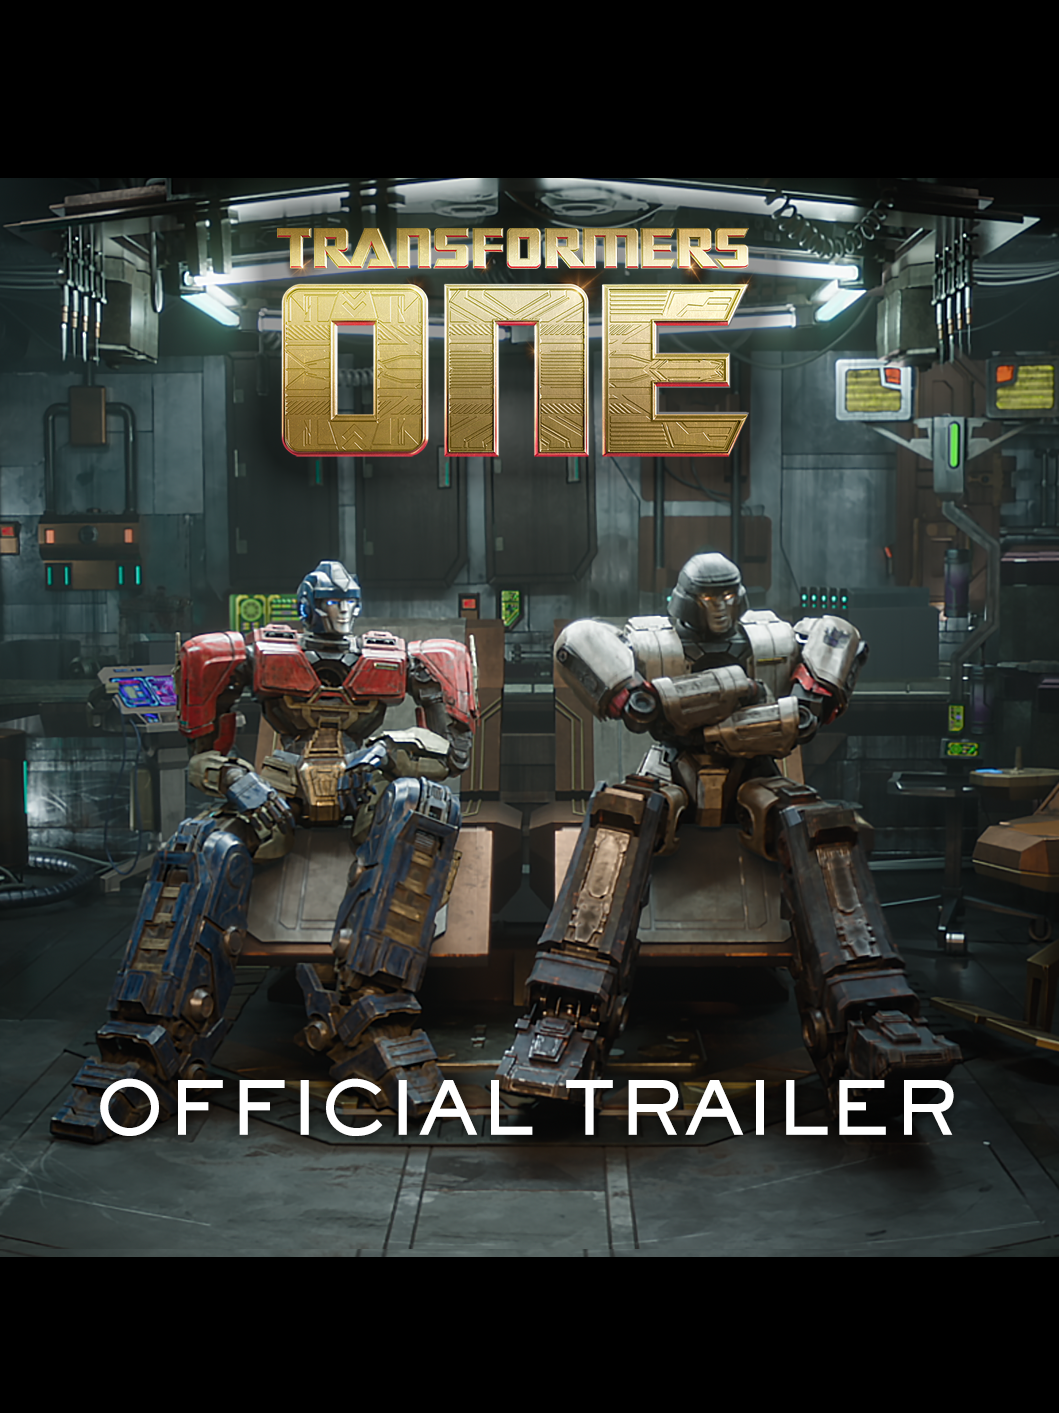 Every Transformer has an origin. Watch the new trailer for #TransformersOne – only in cinemas October.